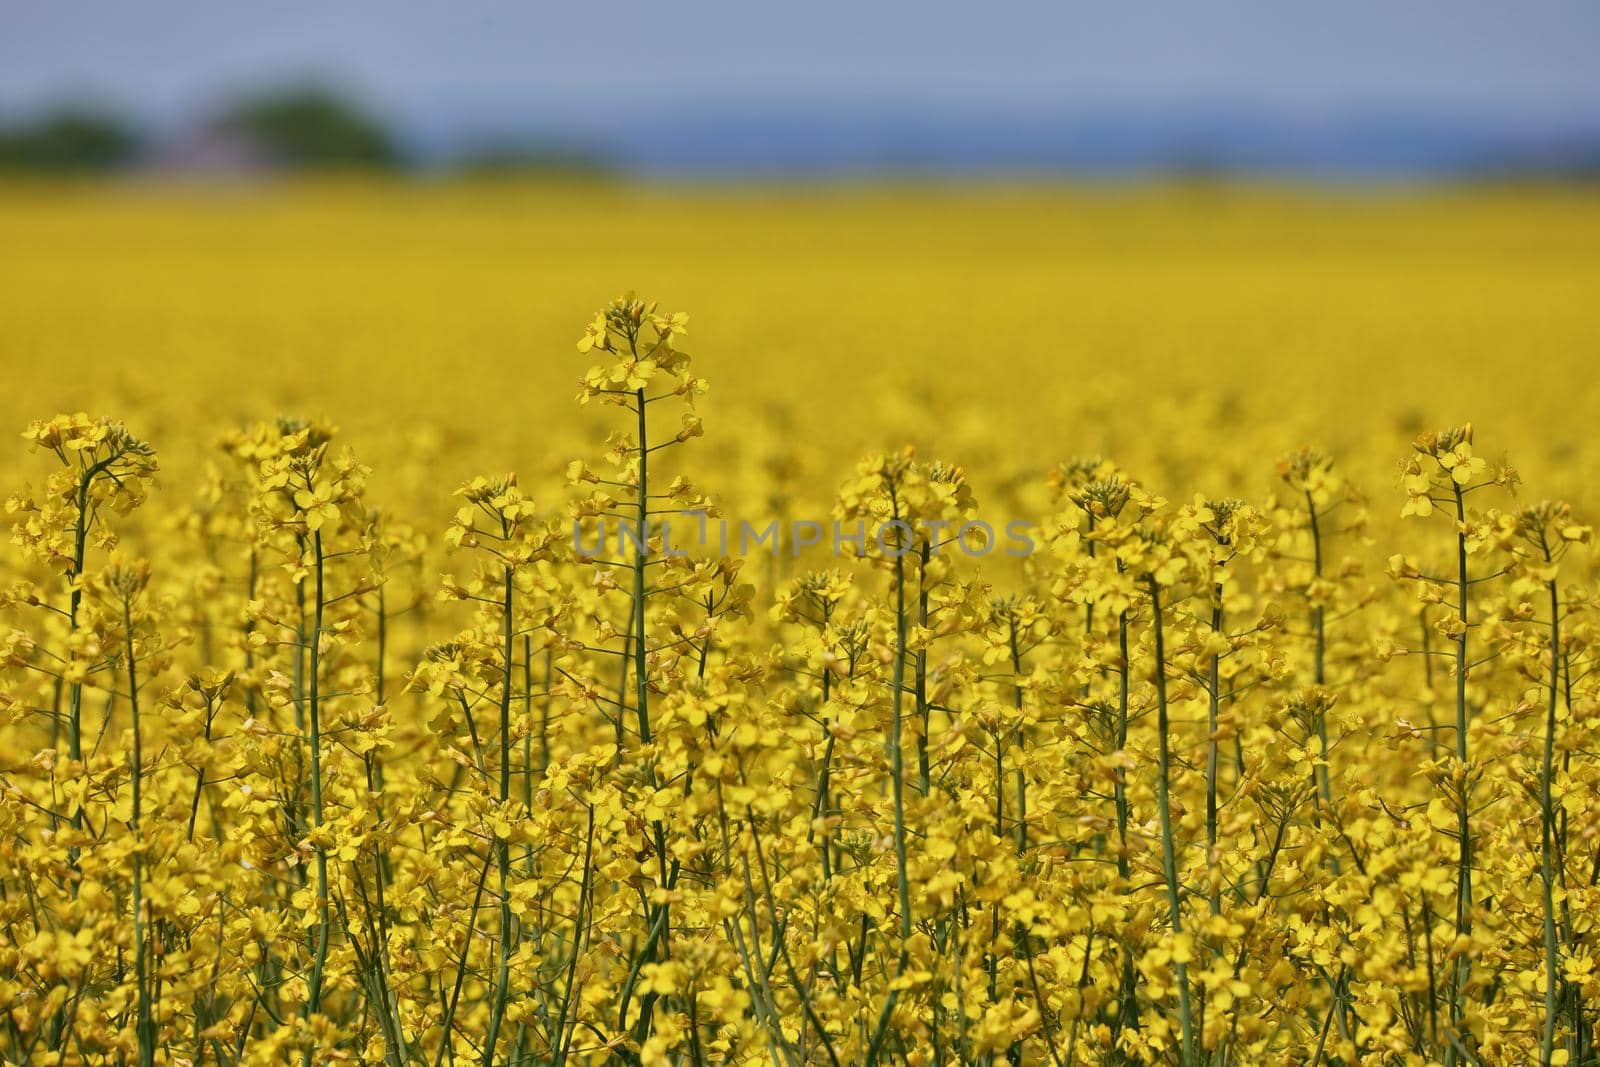 Close up of Yellow Canola Flowers in a Farm Field Against a Sunny Blue Sky. High quality photo.